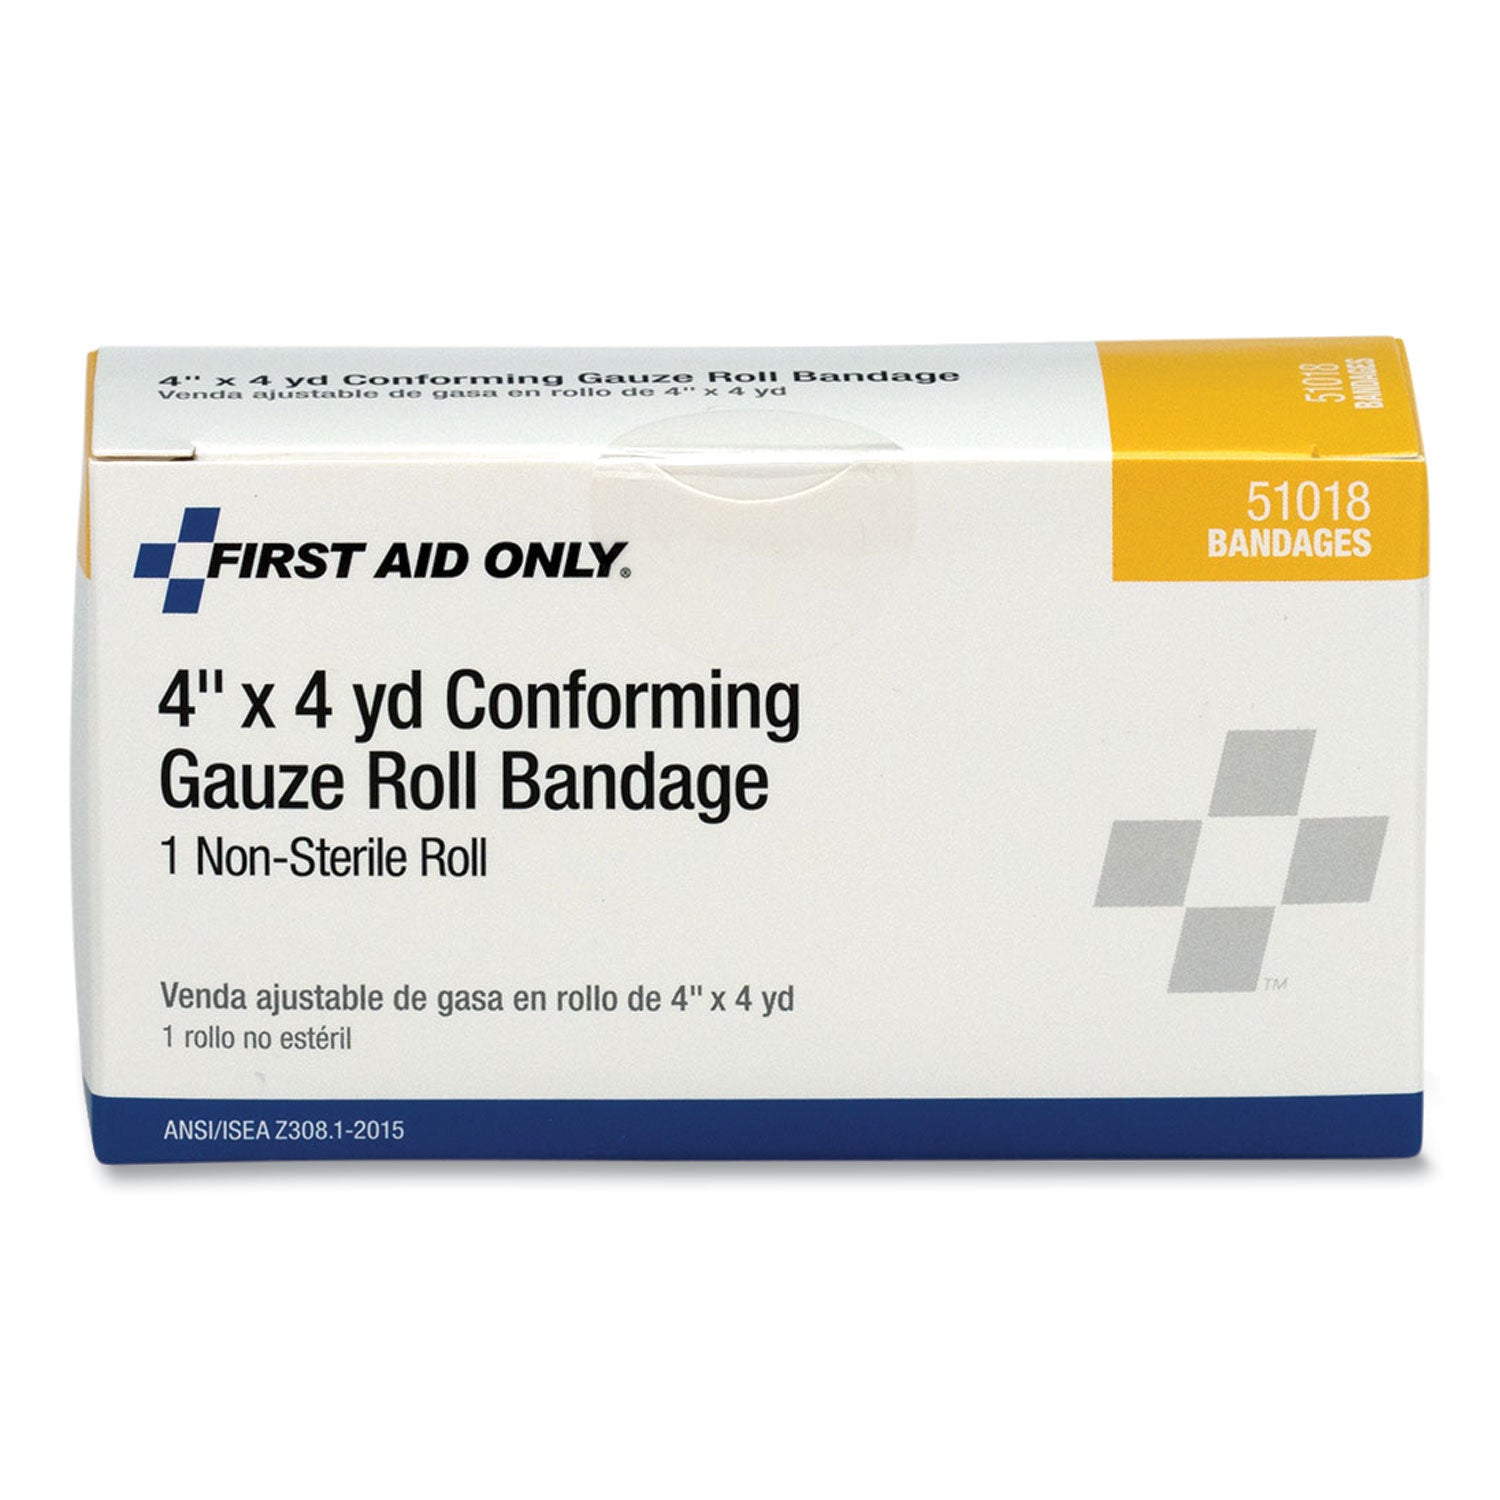 first-aid-conforming-gauze-bandage-non-sterile-4-wide_fao51018 - 2